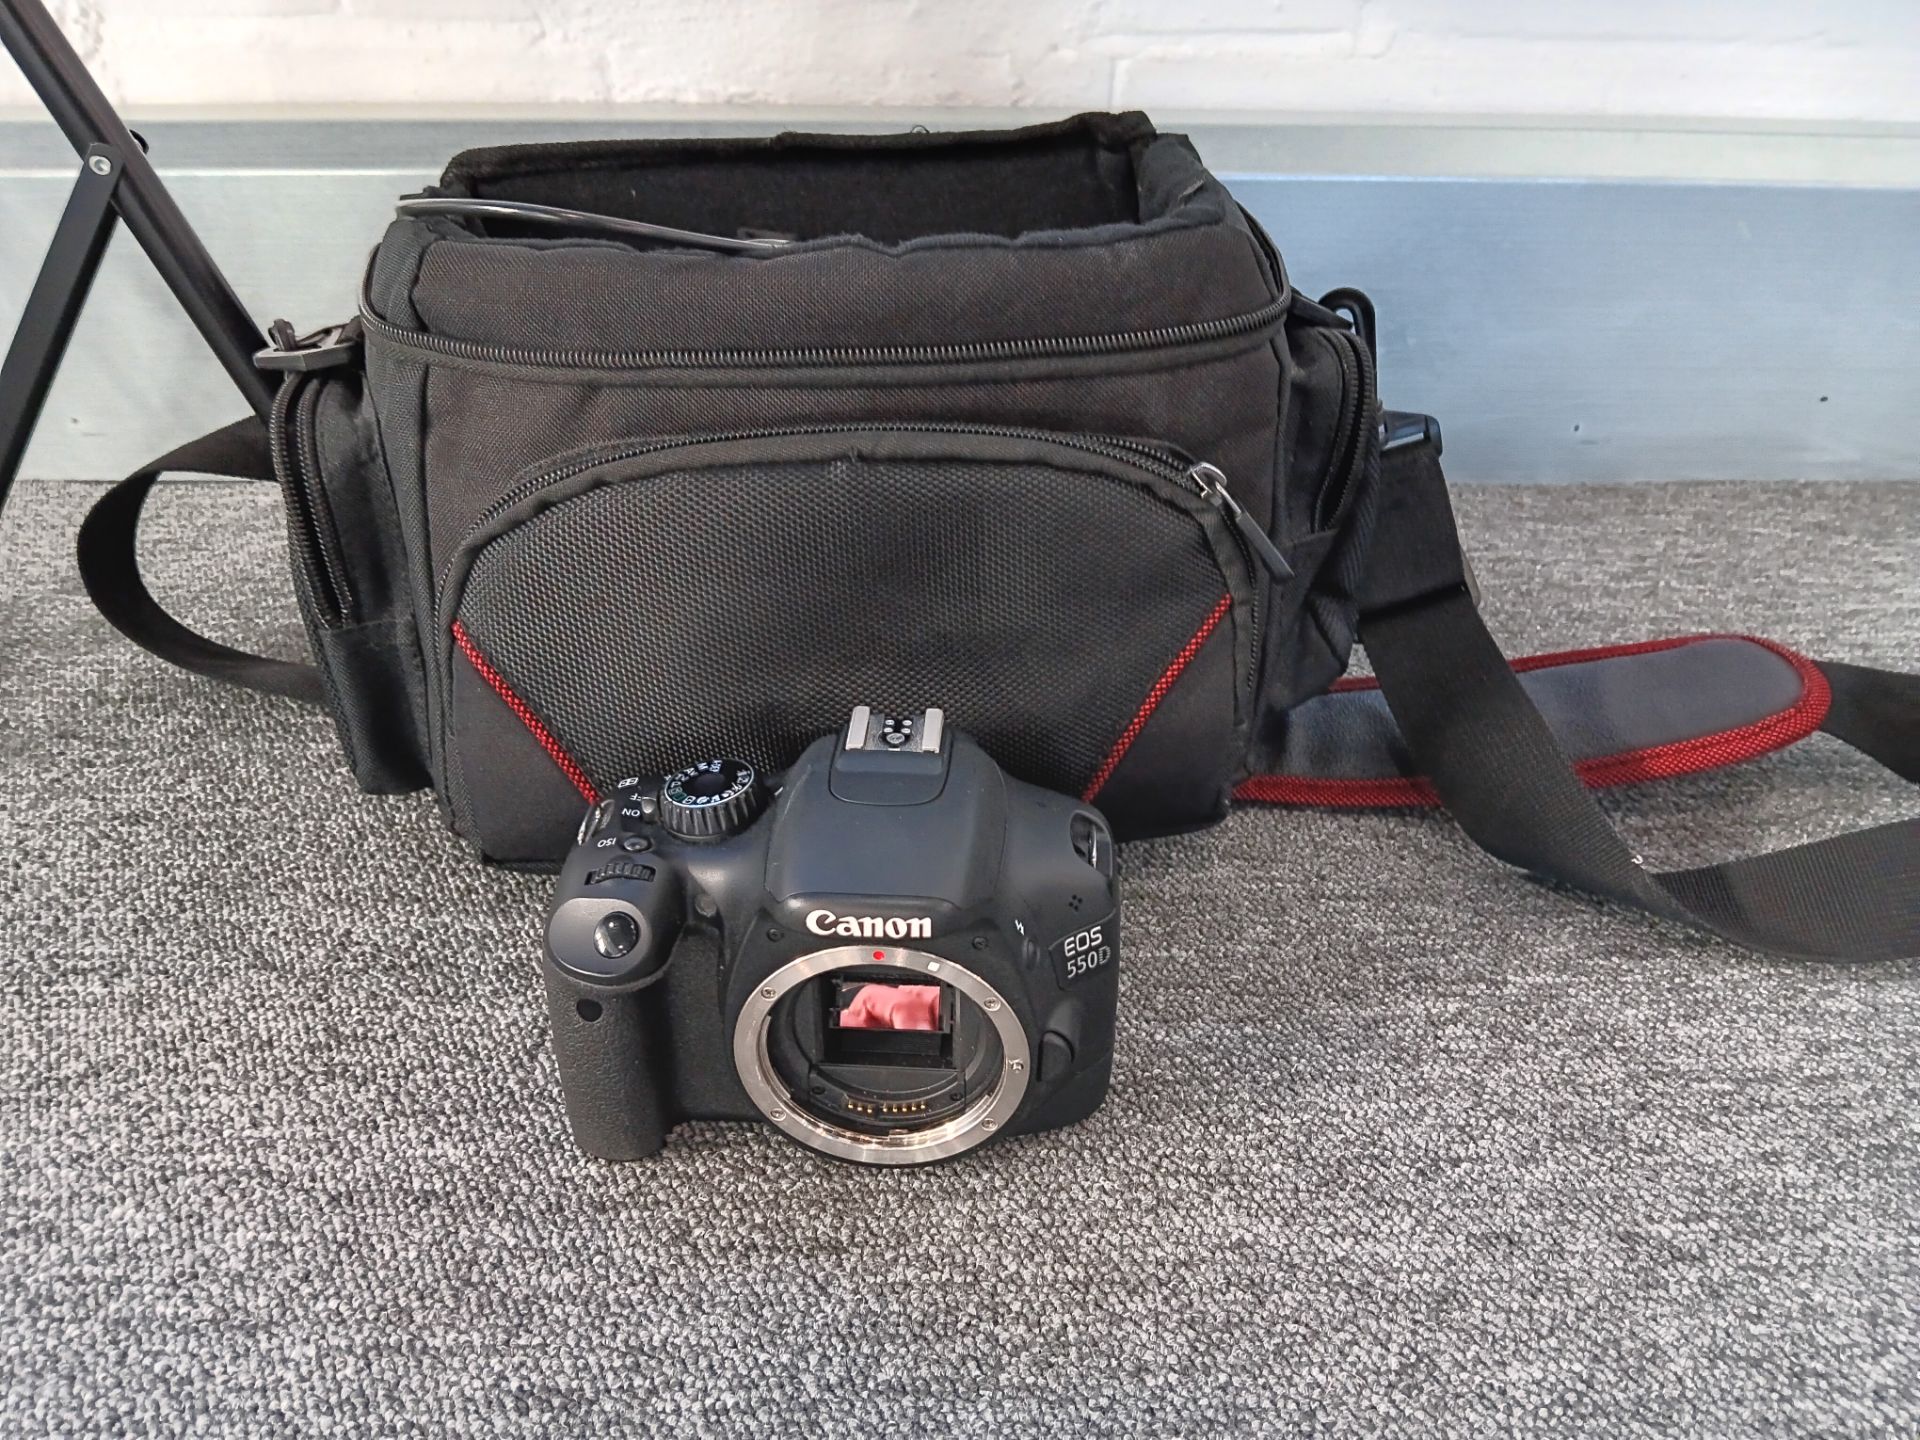 ESDDI Photography Softbox Light with Tripod, Canon EOS 550D Camera (No Lens) & Carry Case - Image 2 of 2